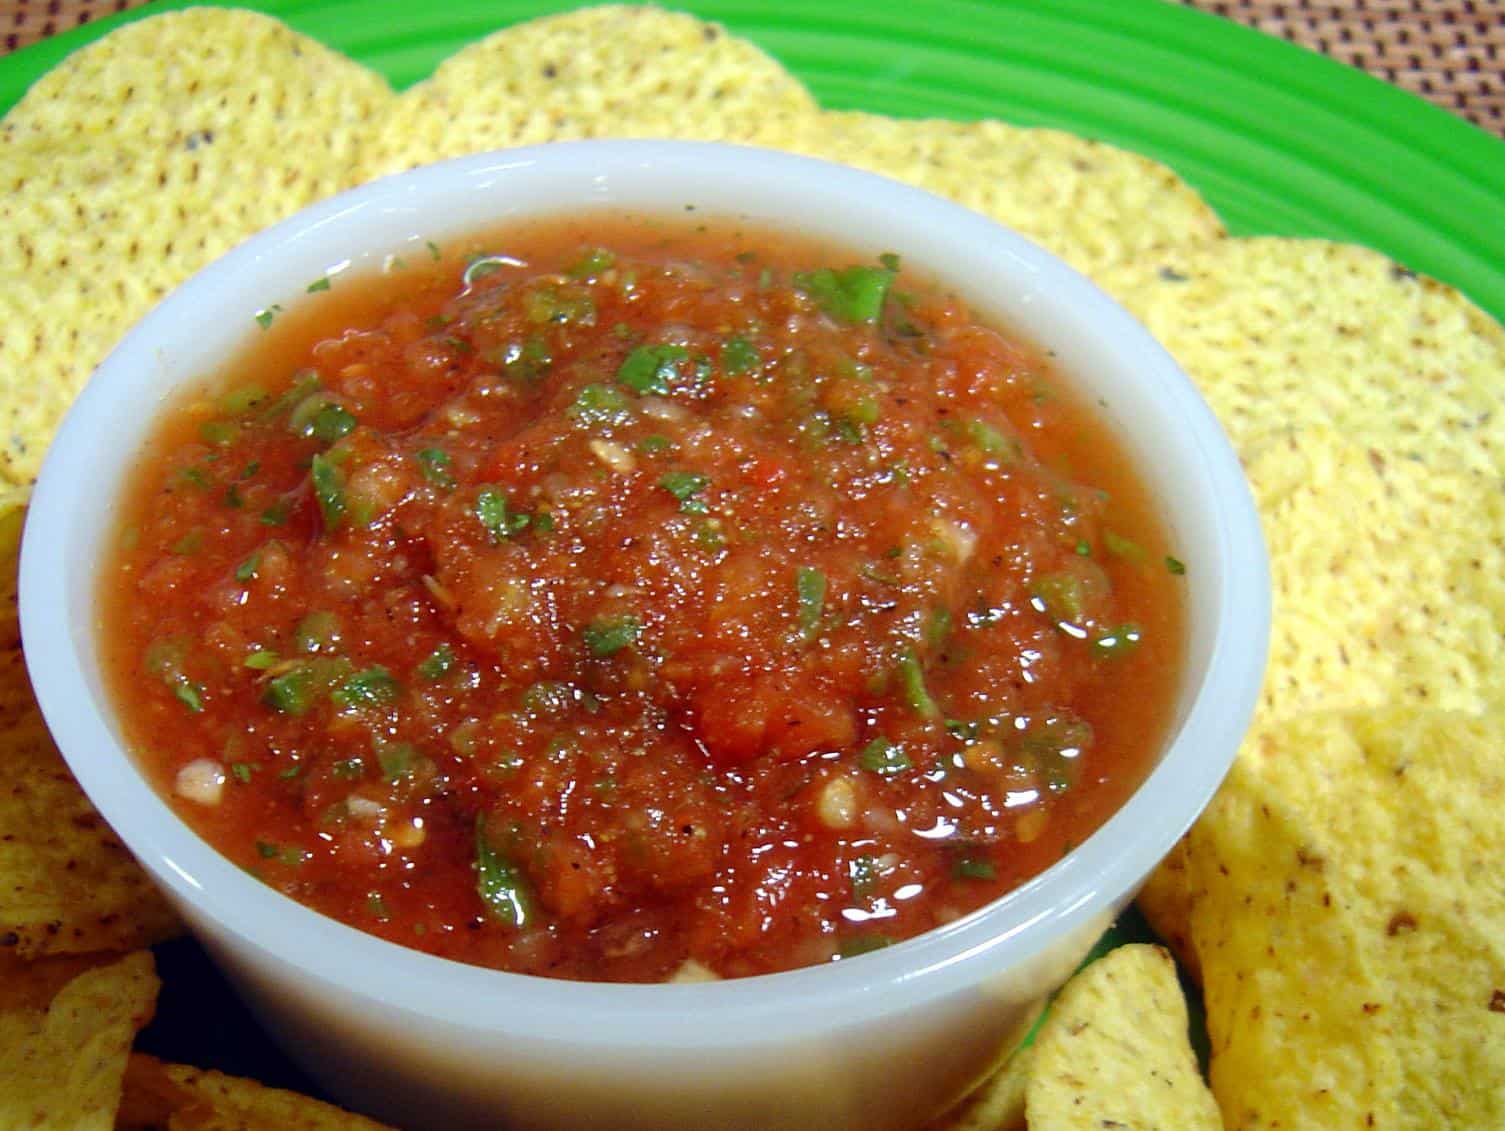 Delicious Texas Trash Salsa: A Must-Try Recipe!